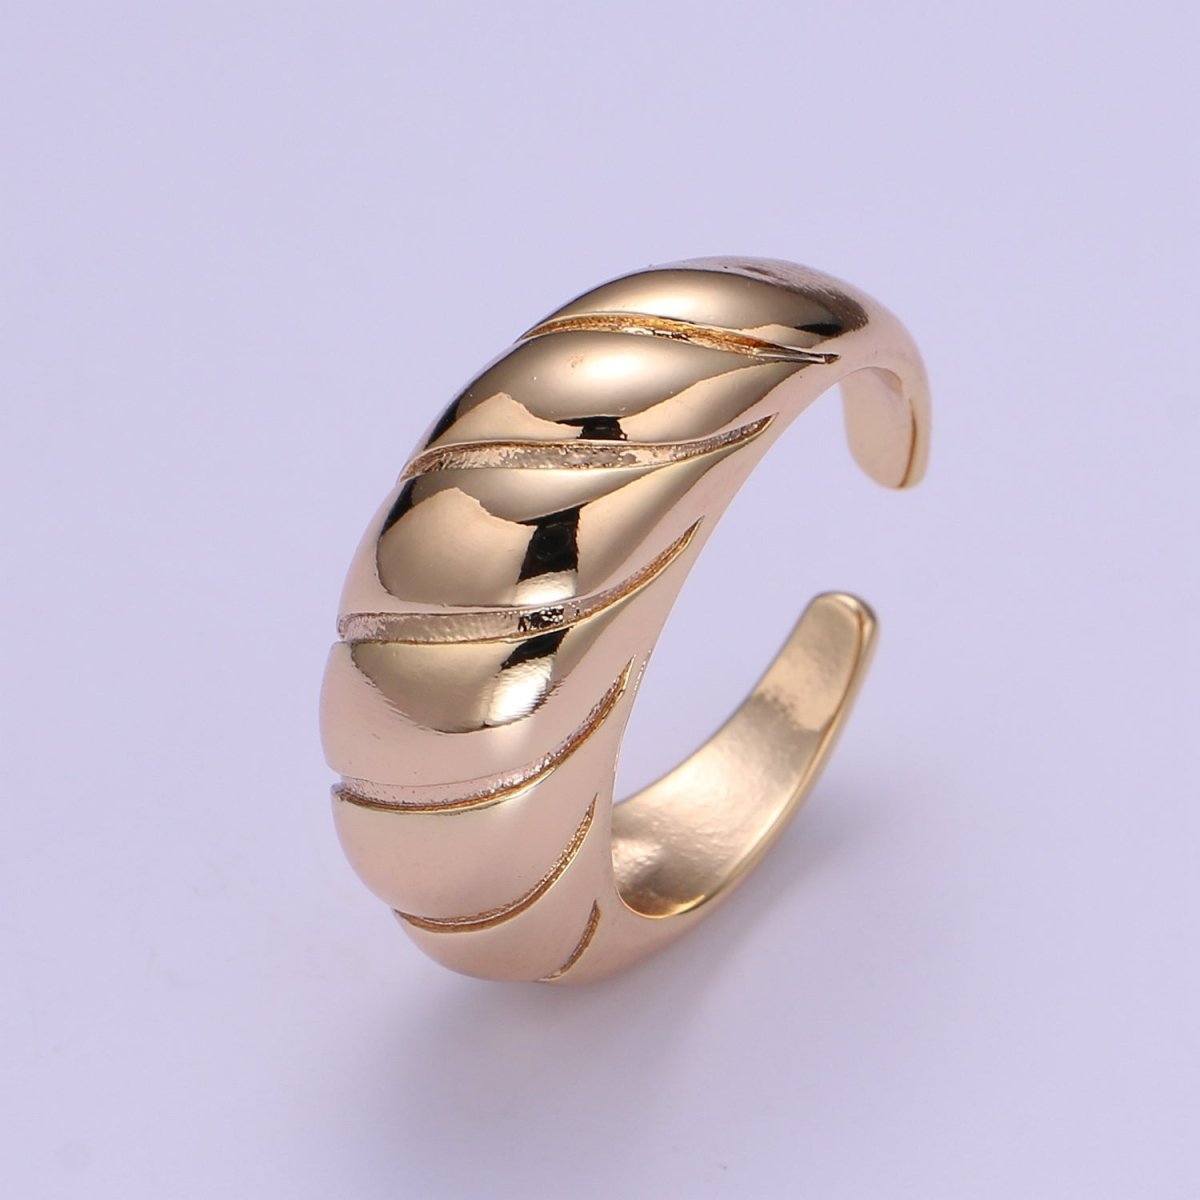 Croissant Ring 18k Gold Filled Open Adjustable Tiny Geometric Casual Daily Wear Ring Jewelry O-955 - DLUXCA